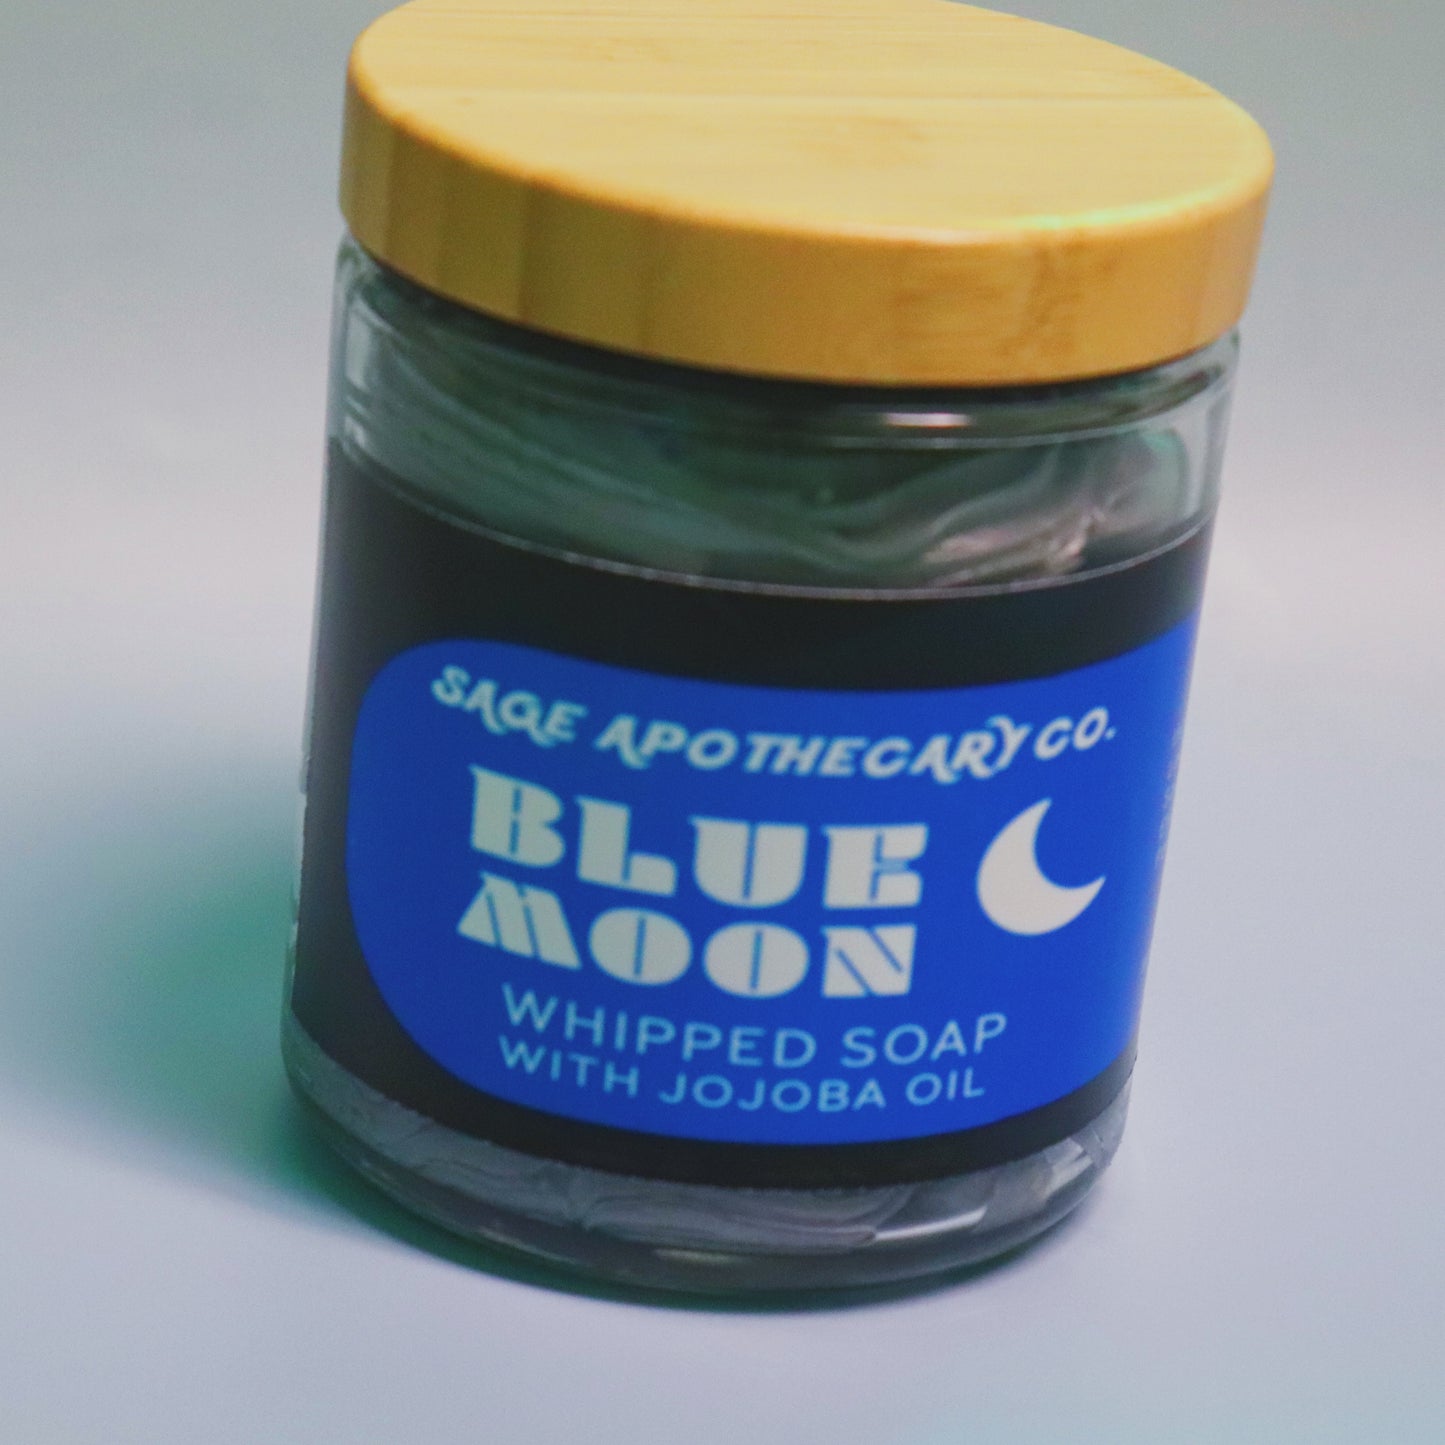 BLUE MOON WHIPPED SOAP